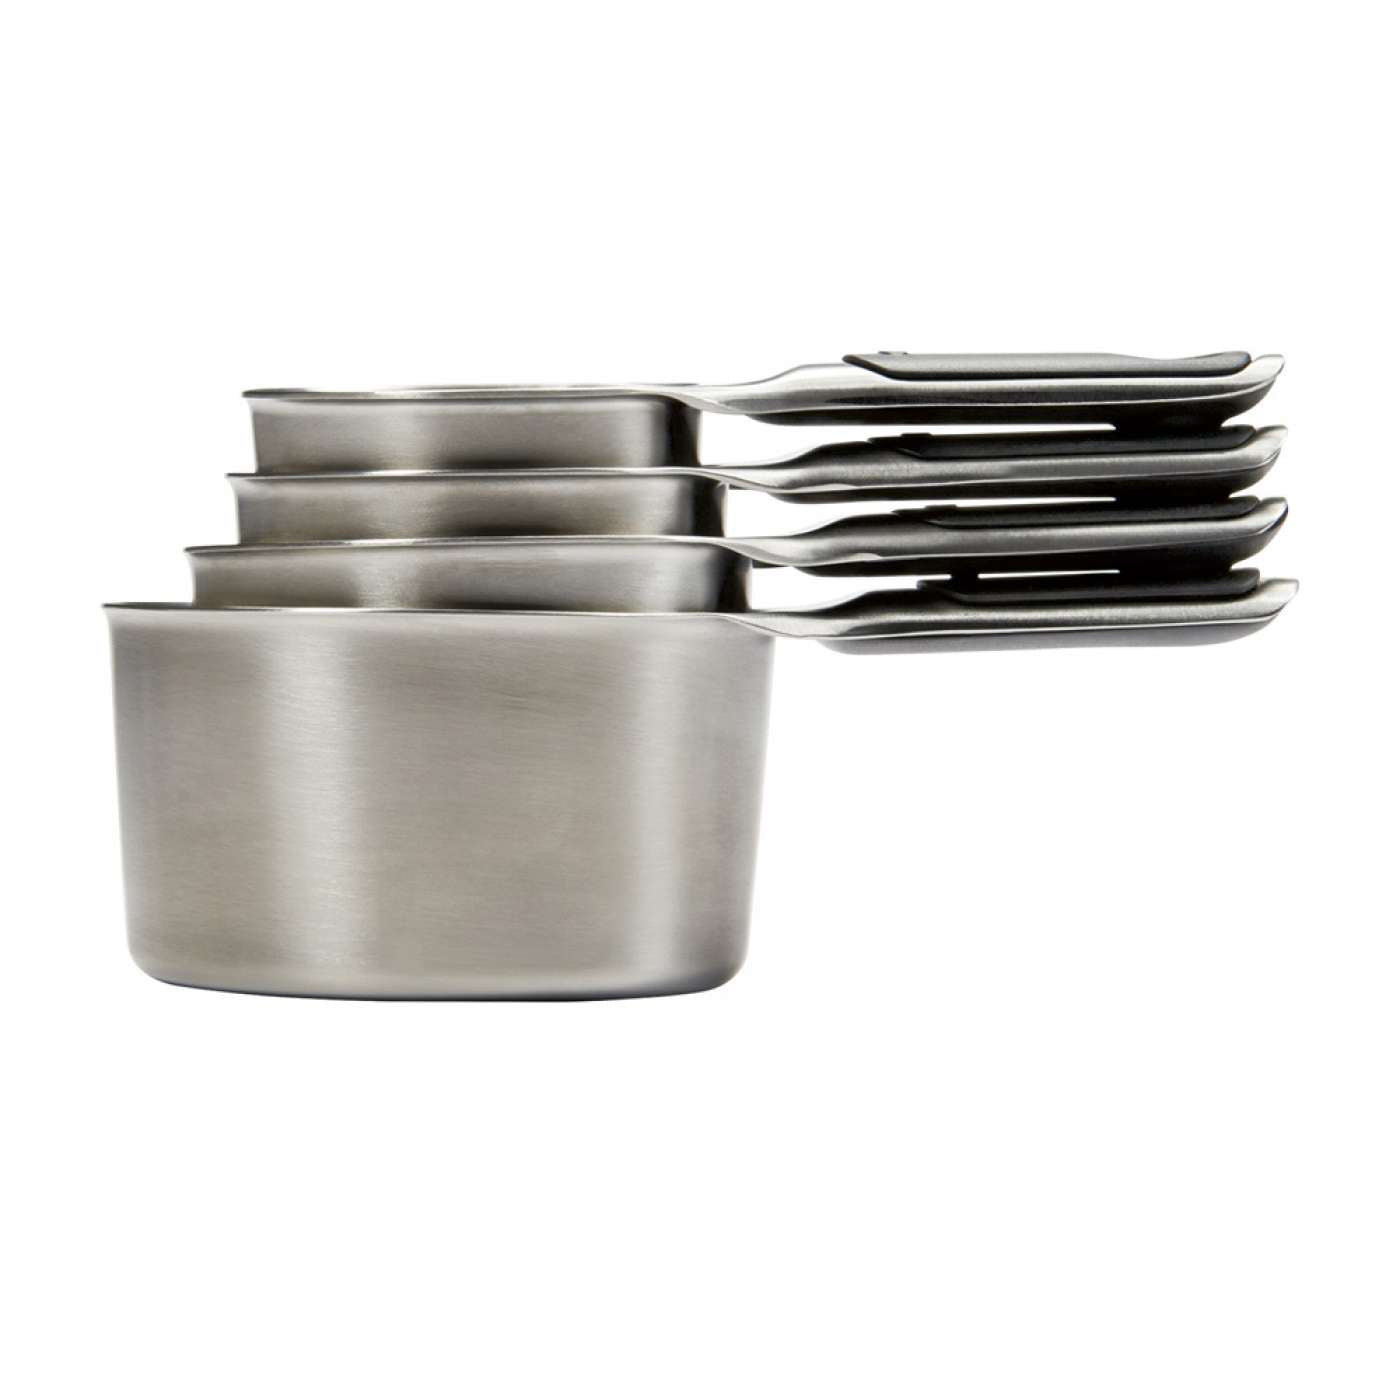 OXO Stainless Steel Measuring Cups - Set of 4